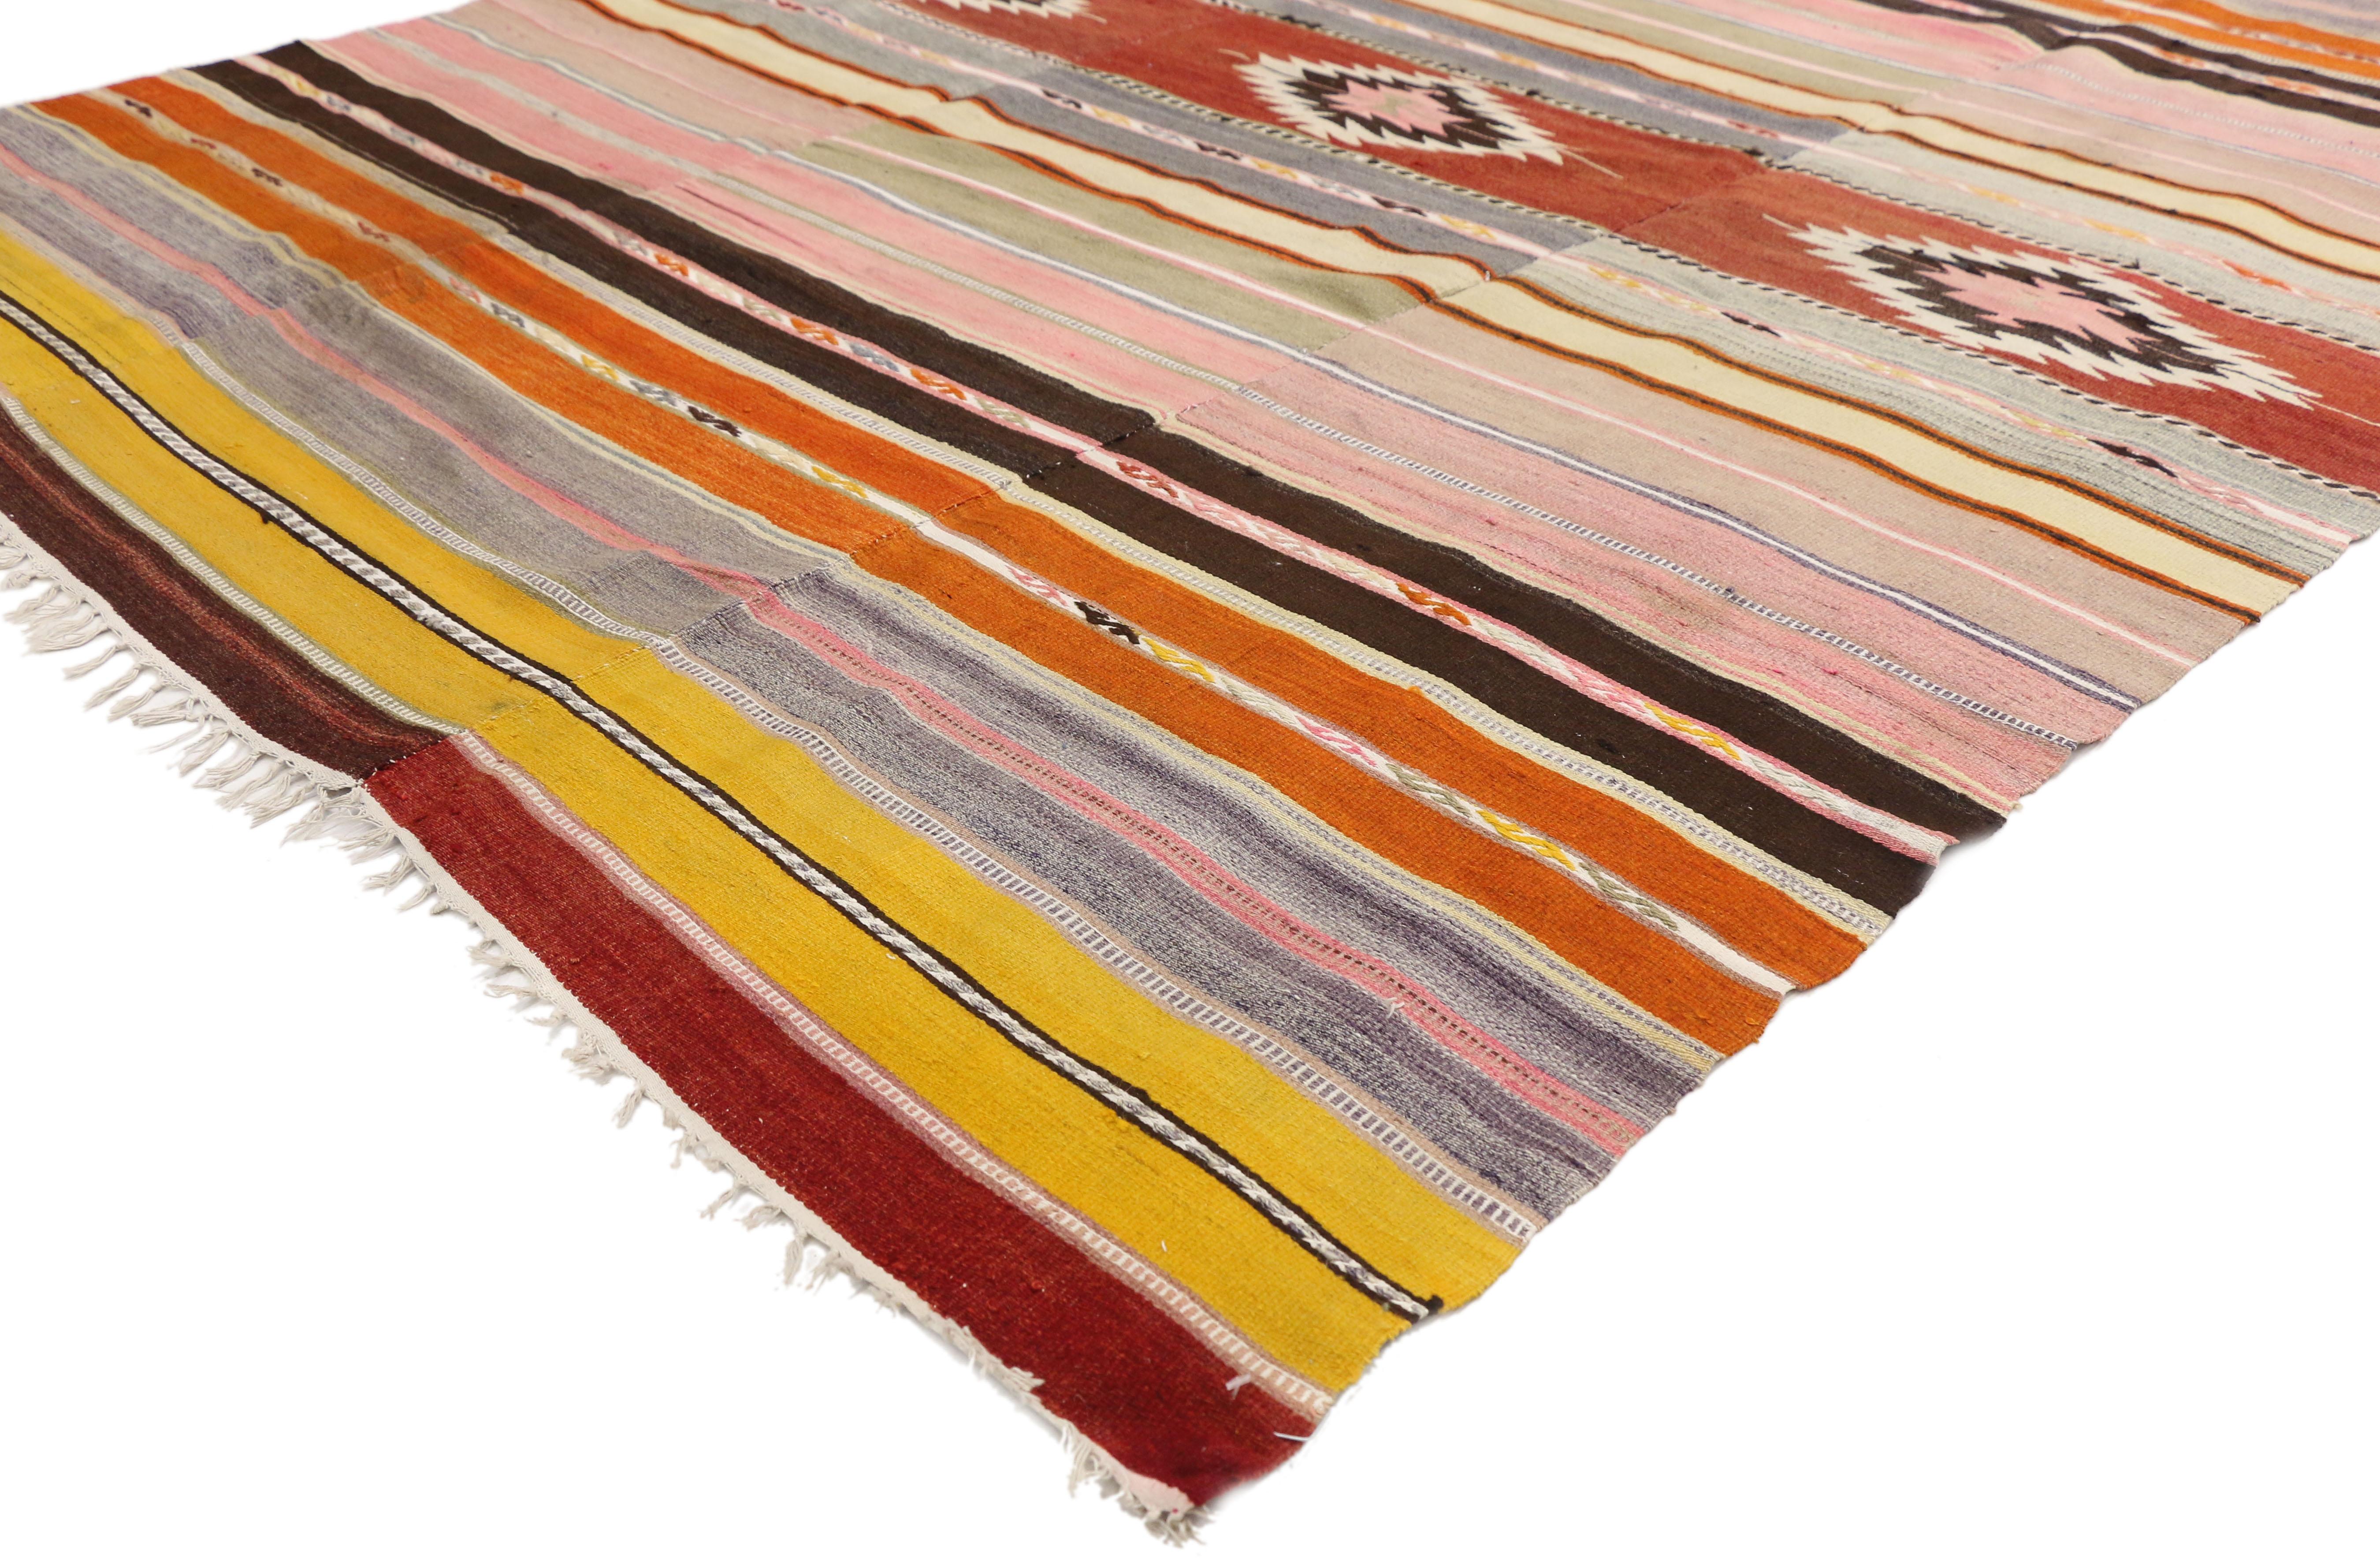 51279, southwestern Bohemian vintage Turkish Kilim rug, flat-weave Kilim tribal rug. This hand woven wool vintage Turkish Kilim rug displays symbolic tribal motifs and bright hues make a statement and create a sense of animation. This Southwestern